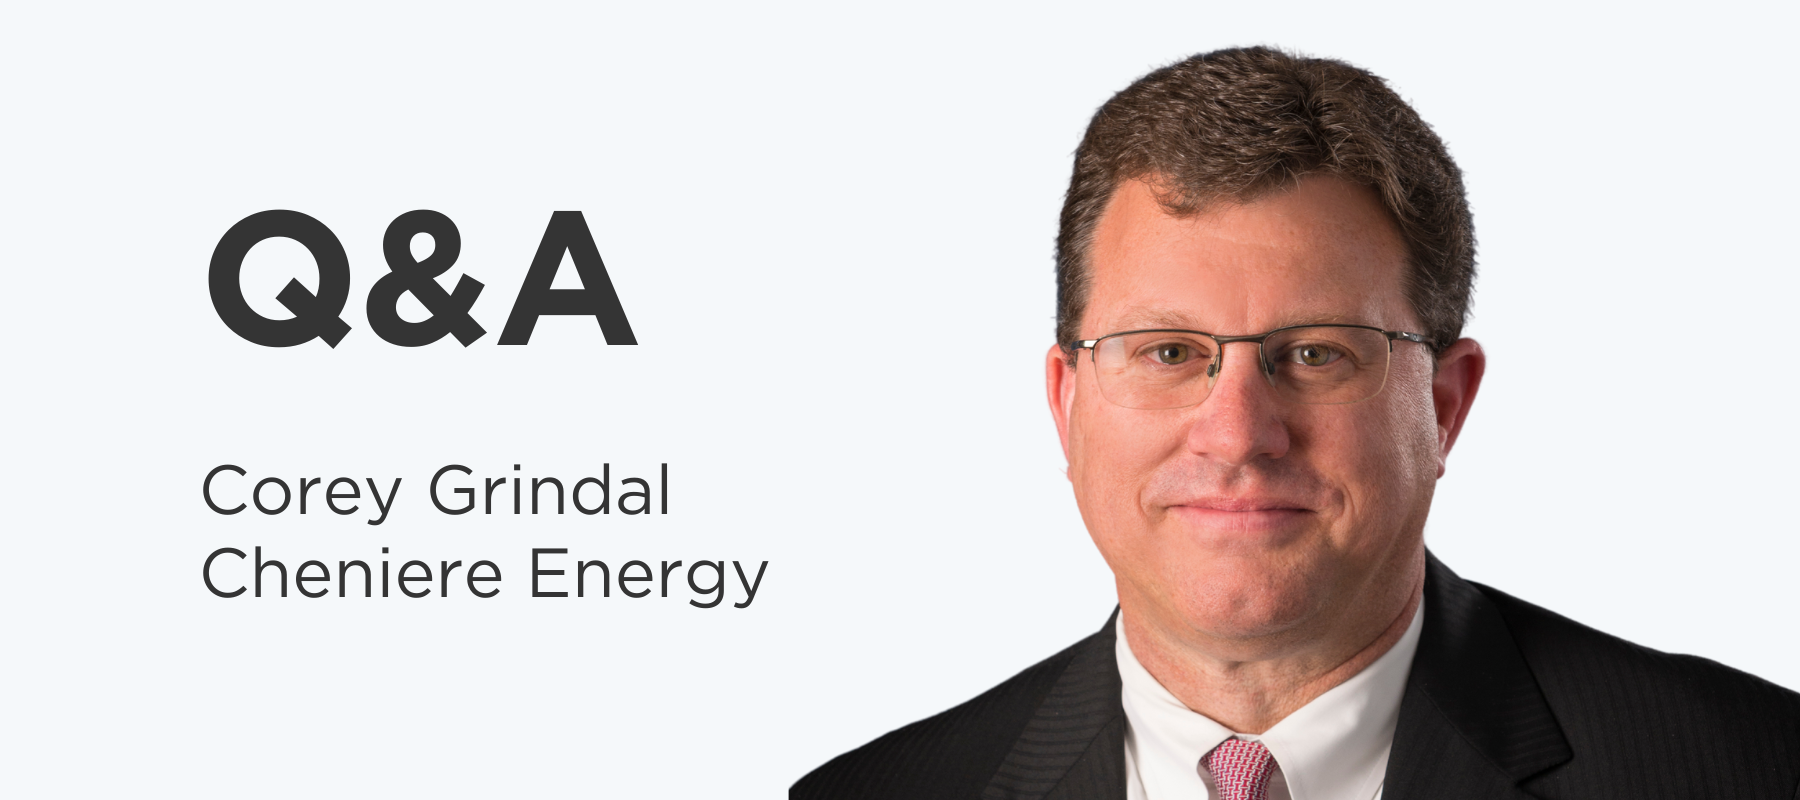 Corey Grindal, Executive Vice President and COO of Cheniere Energy, discusses how the US LNG exporter has risen to the challenge of providing Europe with the gas to replace lost Russian pipeline supplies.